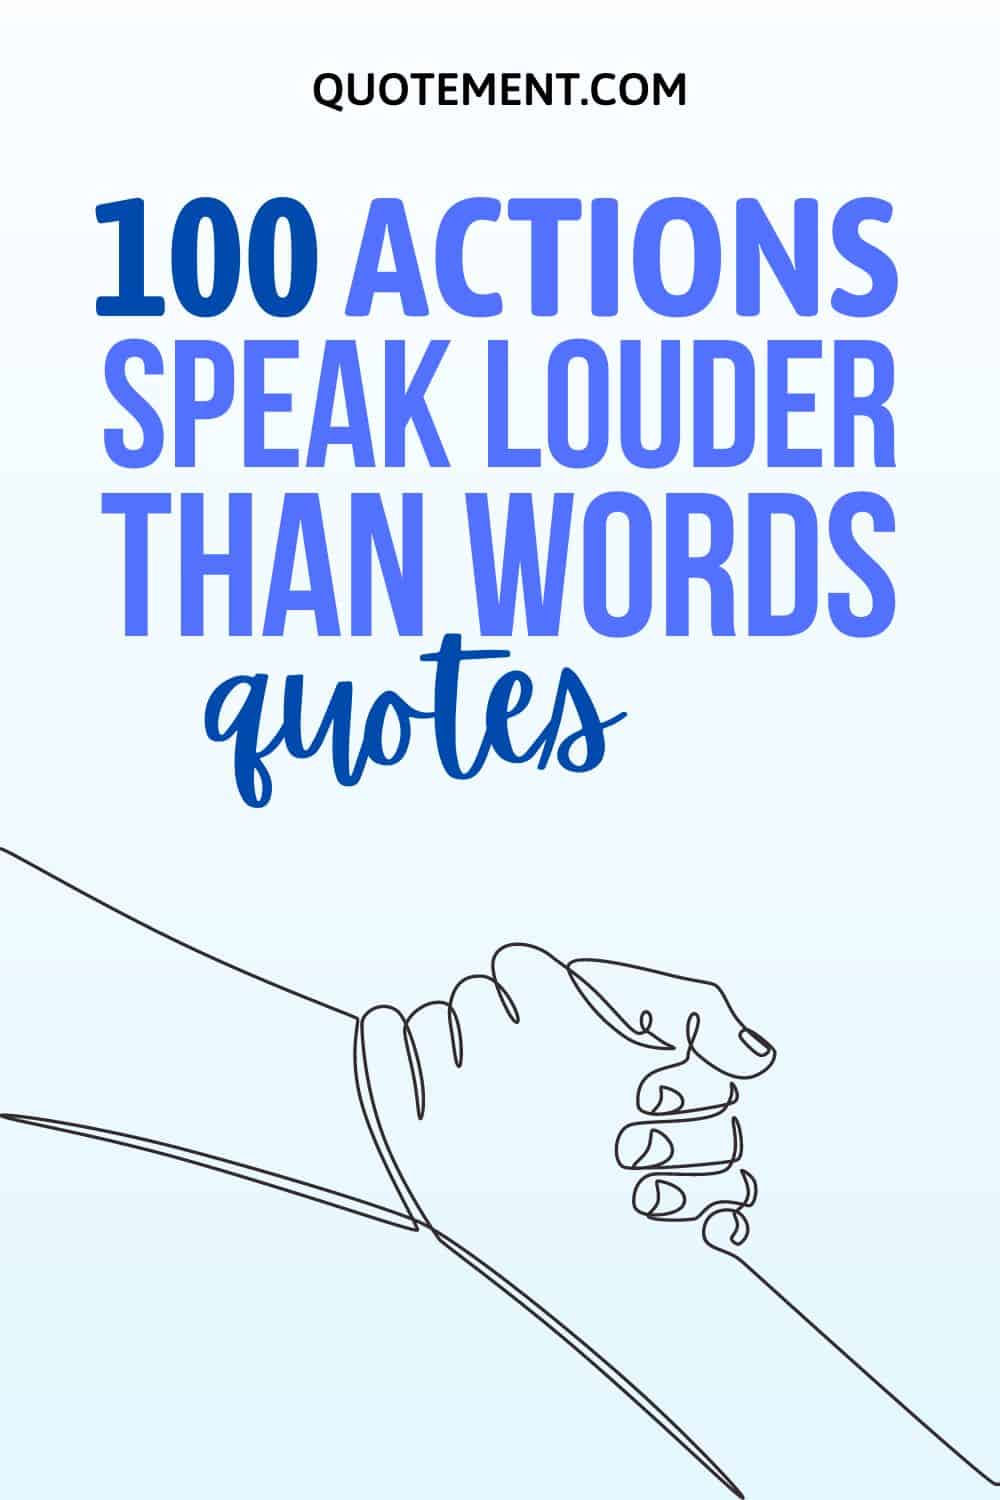 100 Actions Speak Louder Than Words Quotes To Live By